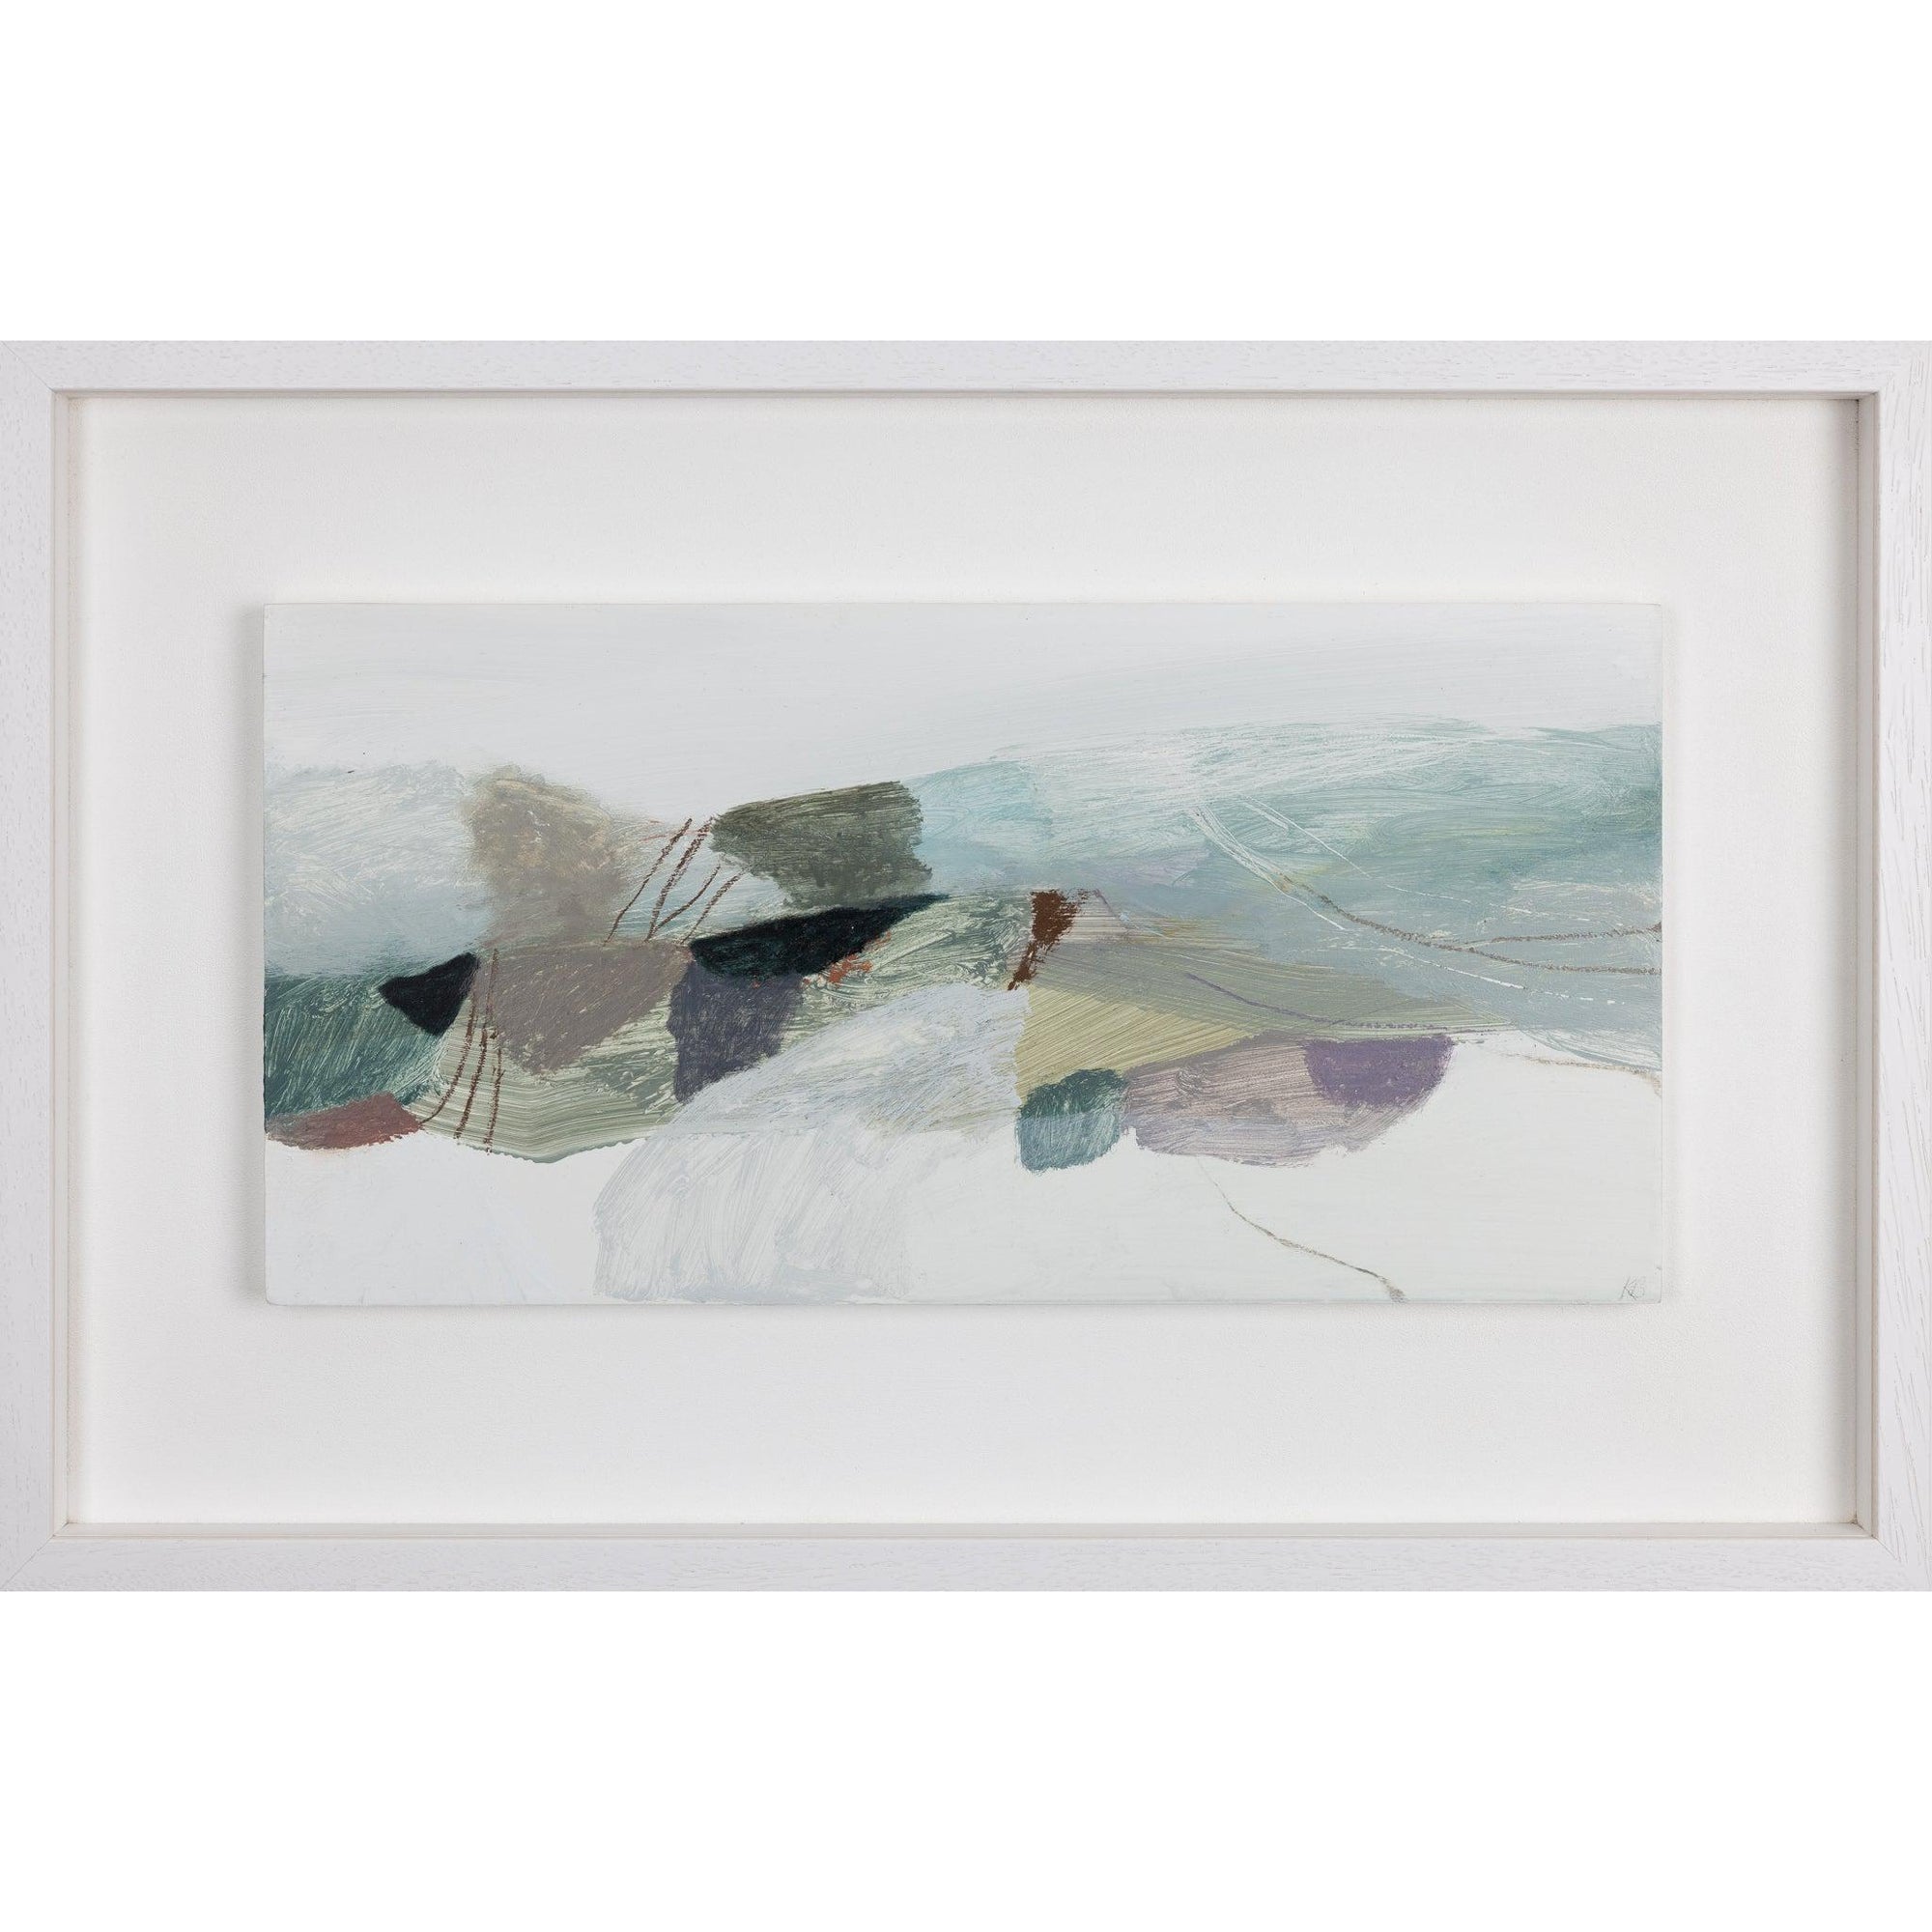 Shifting Colours 4, mixed media by Karen Birchwood, available from Padstow Gallery, Cornwall